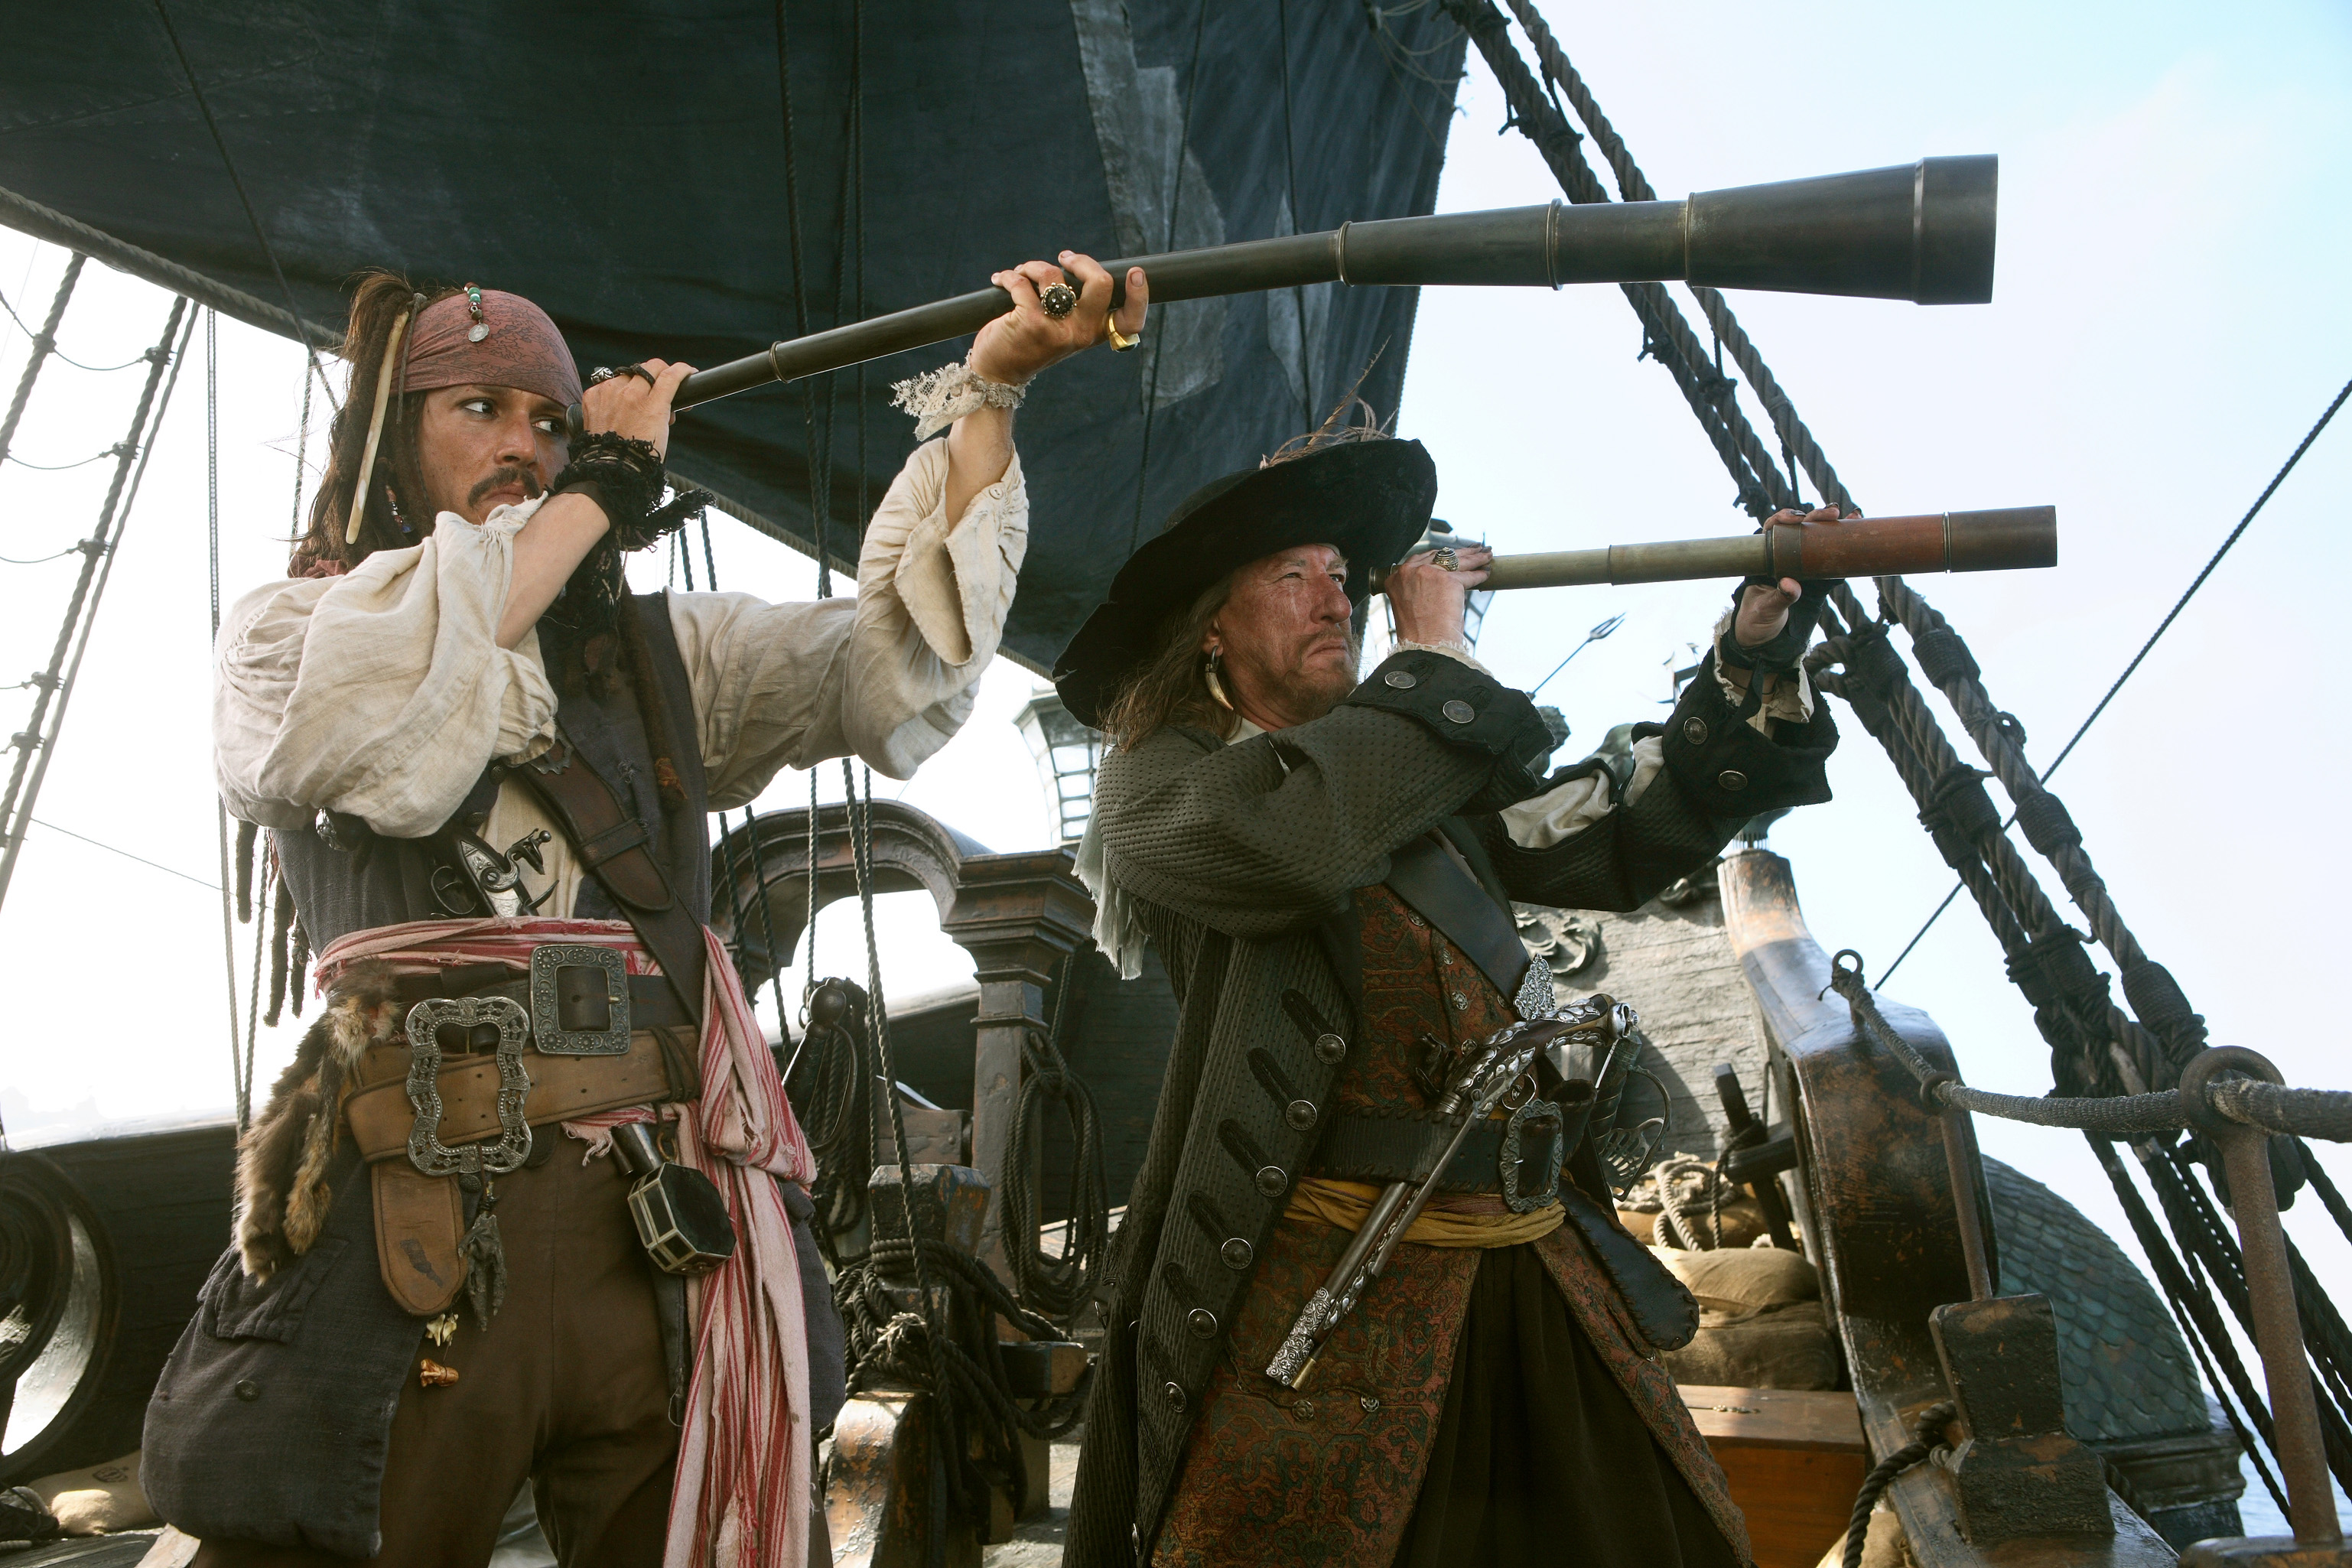 jack sparrow, movie, pirates of the caribbean: at world's end, geoffrey rush, hector barbossa, johnny depp, pirates of the caribbean lock screen backgrounds